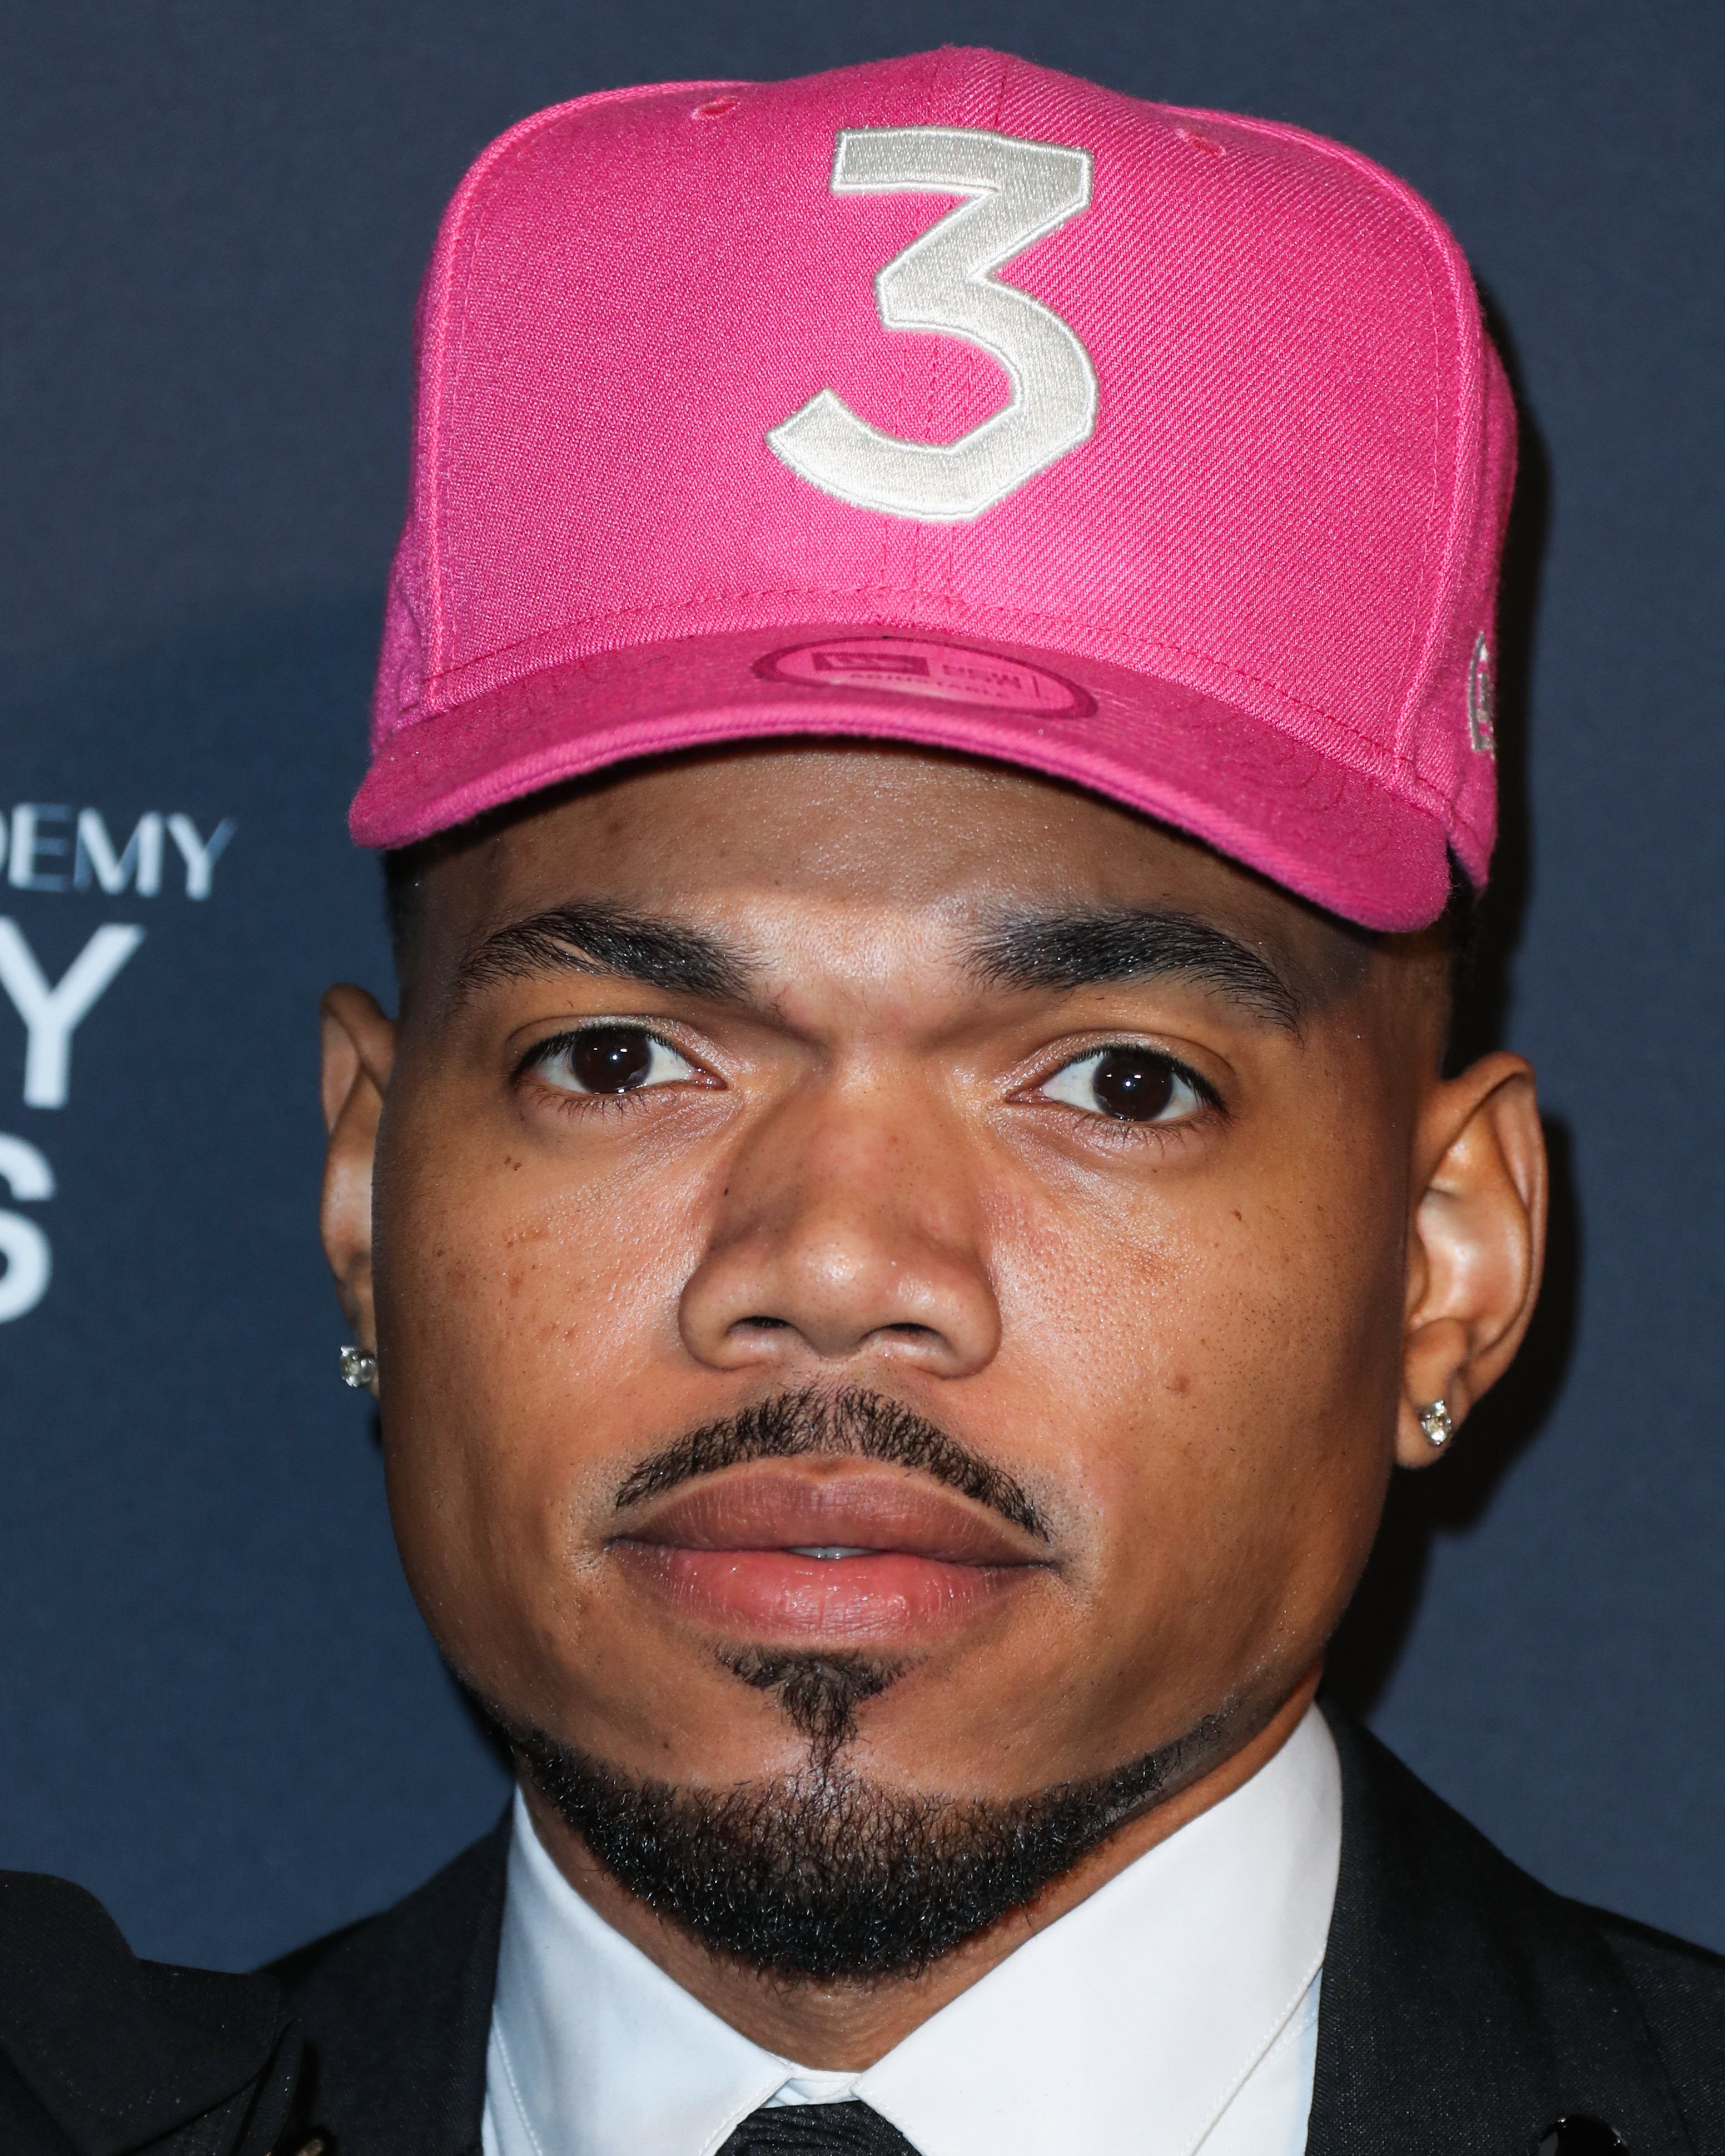 Chance the Rapper arrives at The Recording Academy And Clive Davis&apos; 2020 Pre-GRAMMY Gala held at The Beverly Hilton Hotel on January 25, 2020 in Beverly Hills, Los Angeles, California, United States.